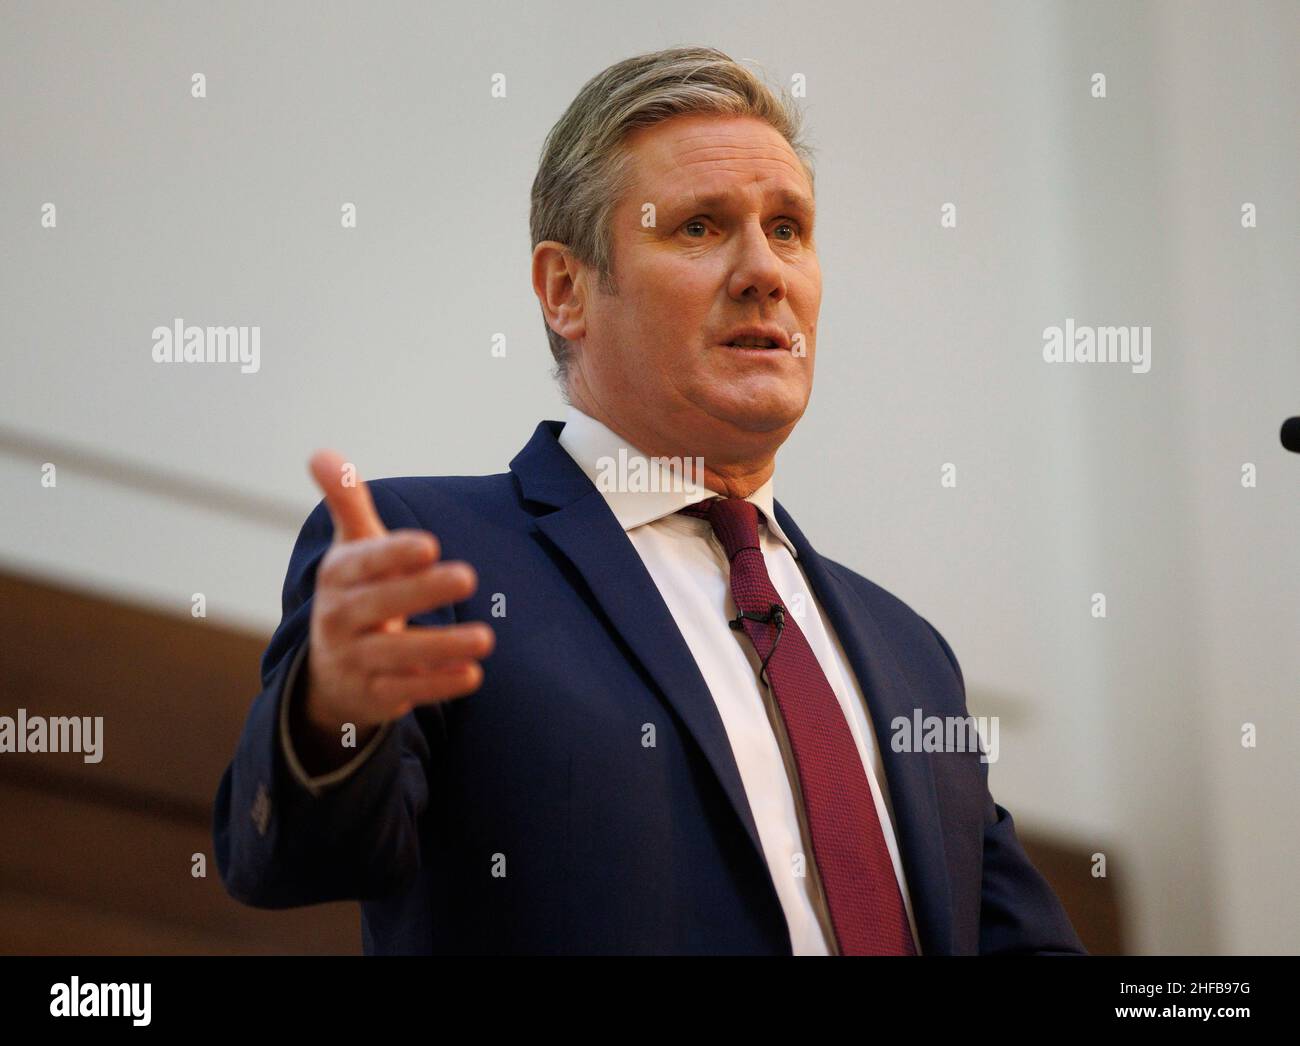 London, UK. 15th Jan, 2022. Labour Leader, Sir Keir Starmer, gives his keynote speech to The Fabian Society. He talked about the parties at Downing Street and pointed the finger at the Prime Minister, Boris Johnson, who admitted being at one of the parties in March 2020. The rest of the country was observing strict lockdown. Credit: Mark Thomas/Alamy Live News Stock Photo